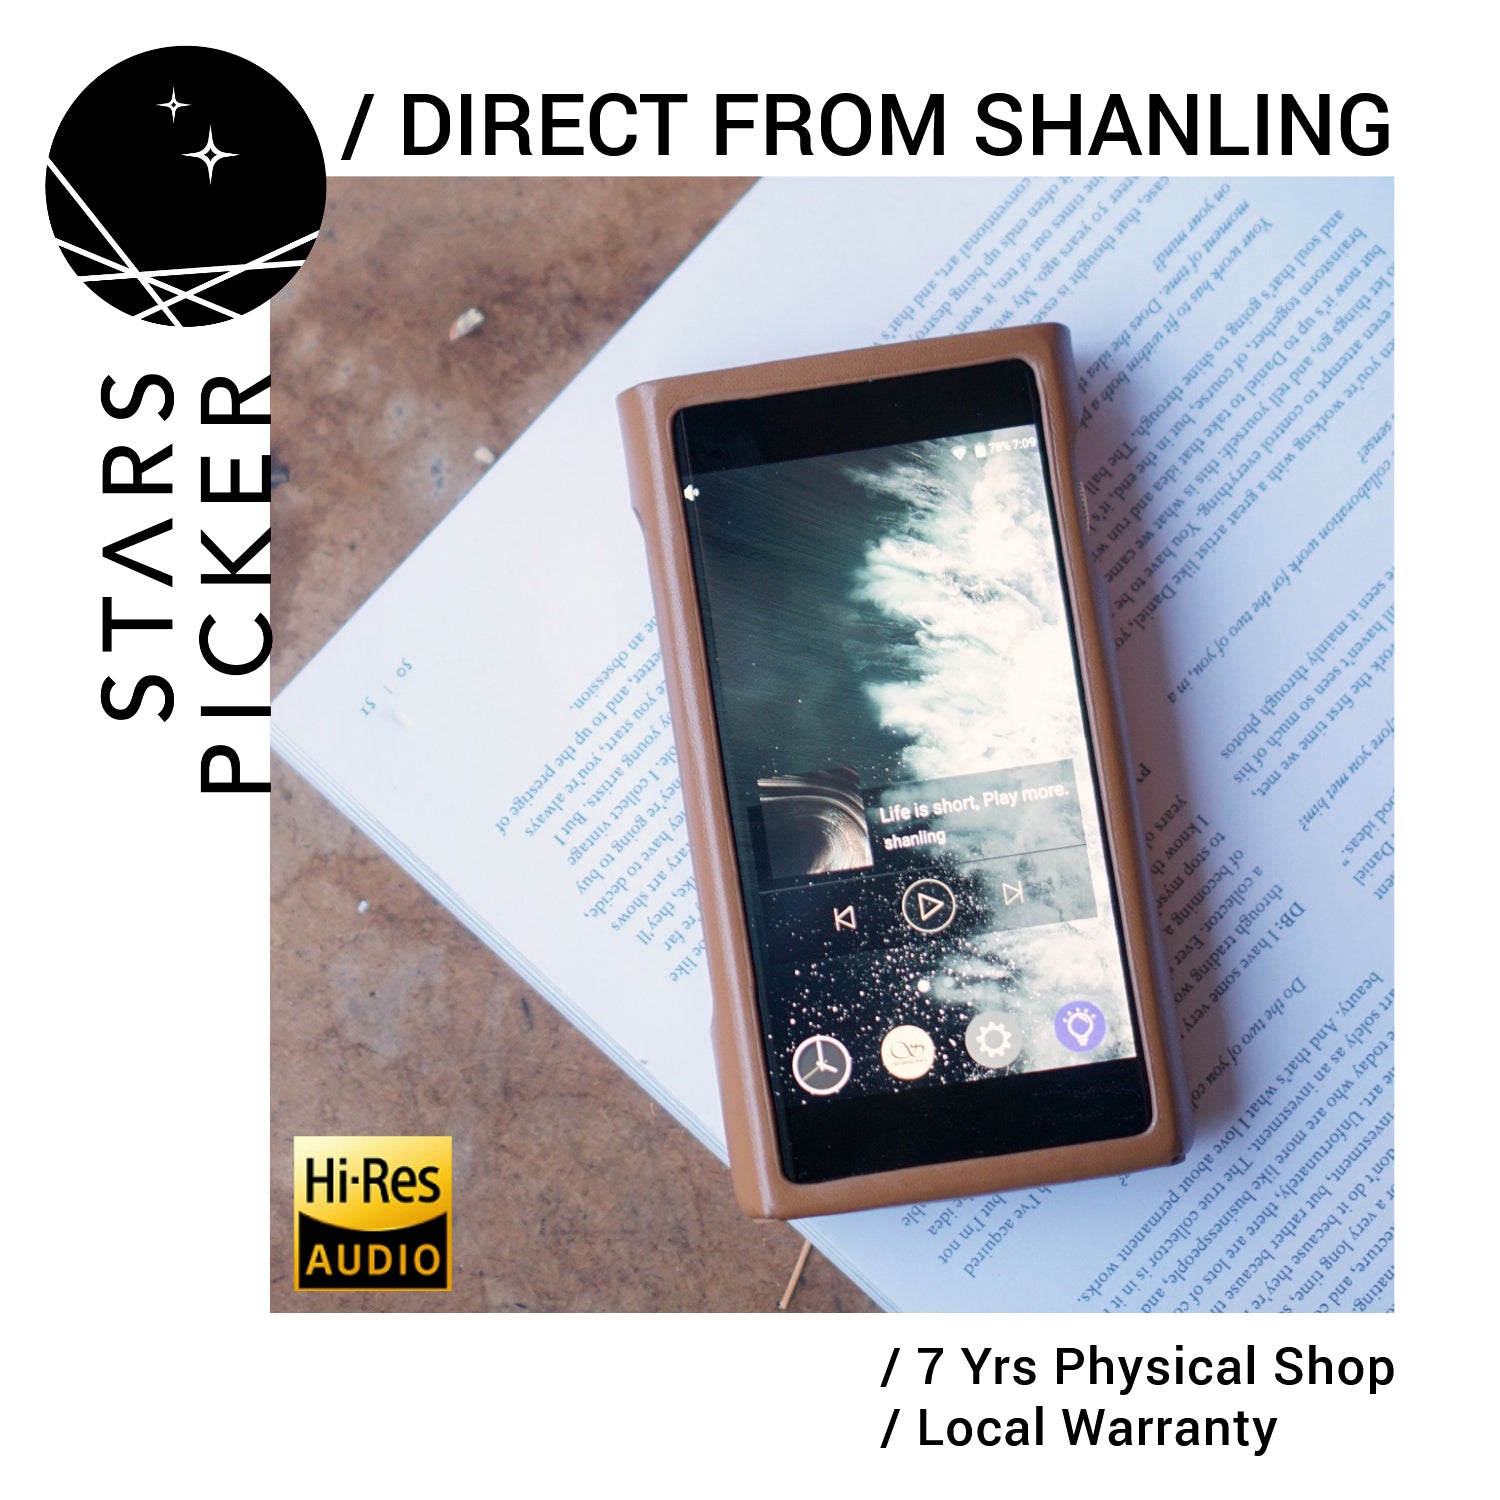 Shanling M6 Pro (21) - Portable DAP Digital Audio Player with MQA Full Android Interface Sabre ESS ES9068AS